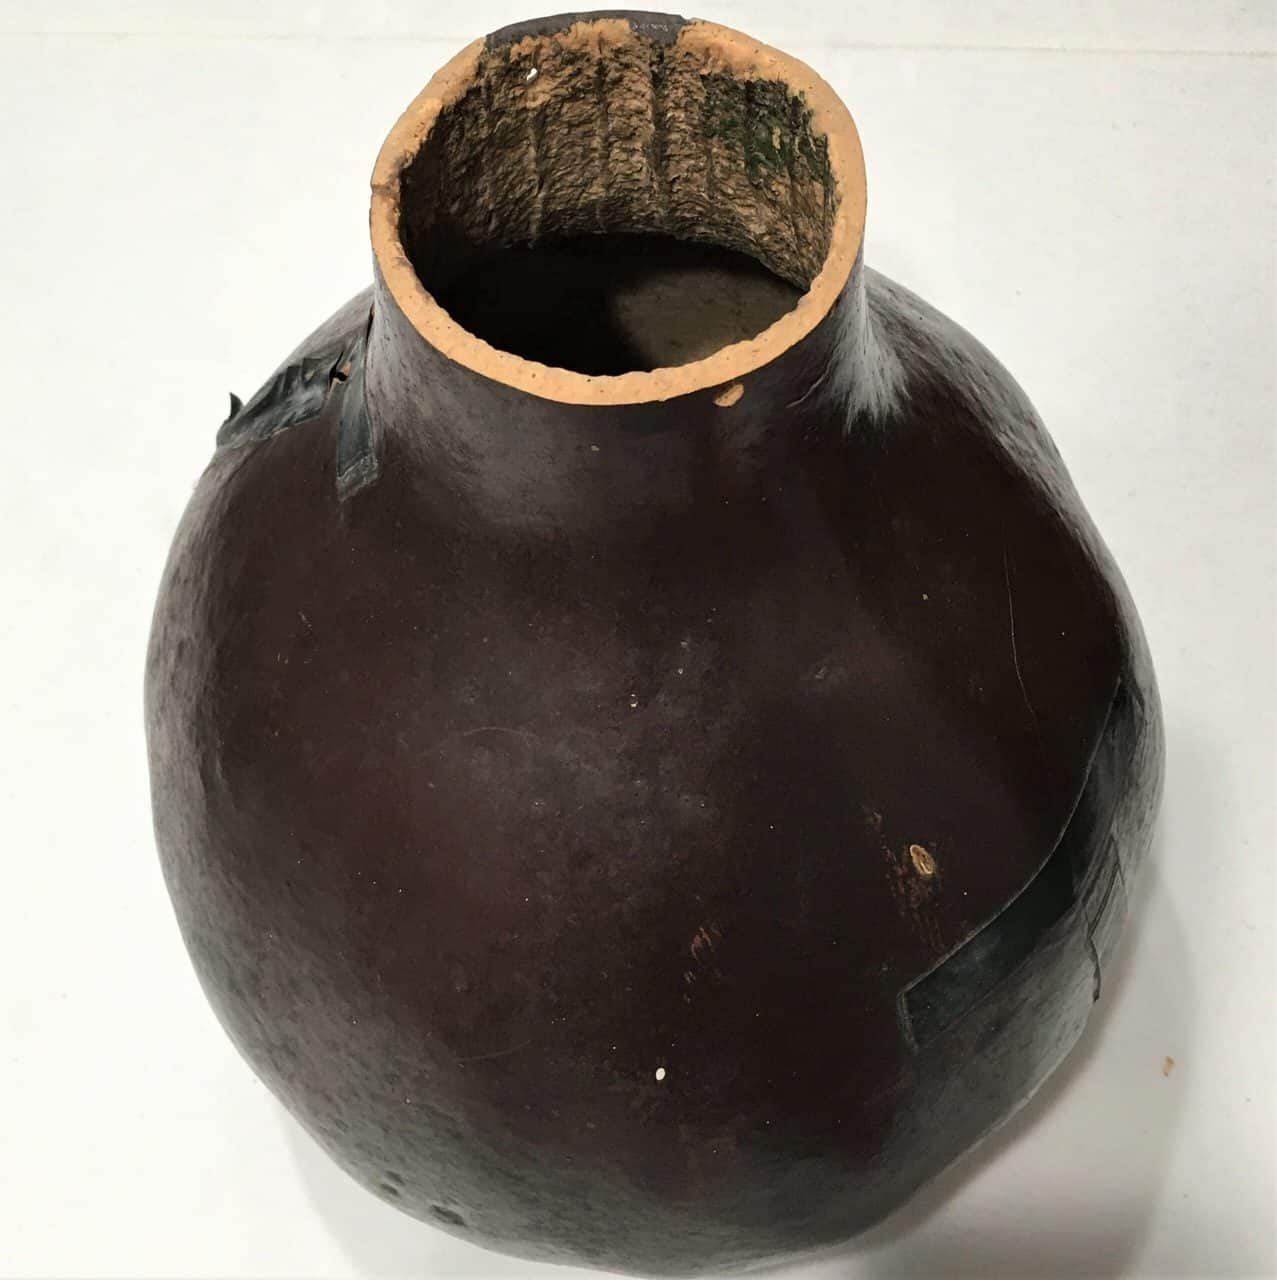 Top view of vase made from a gourd.